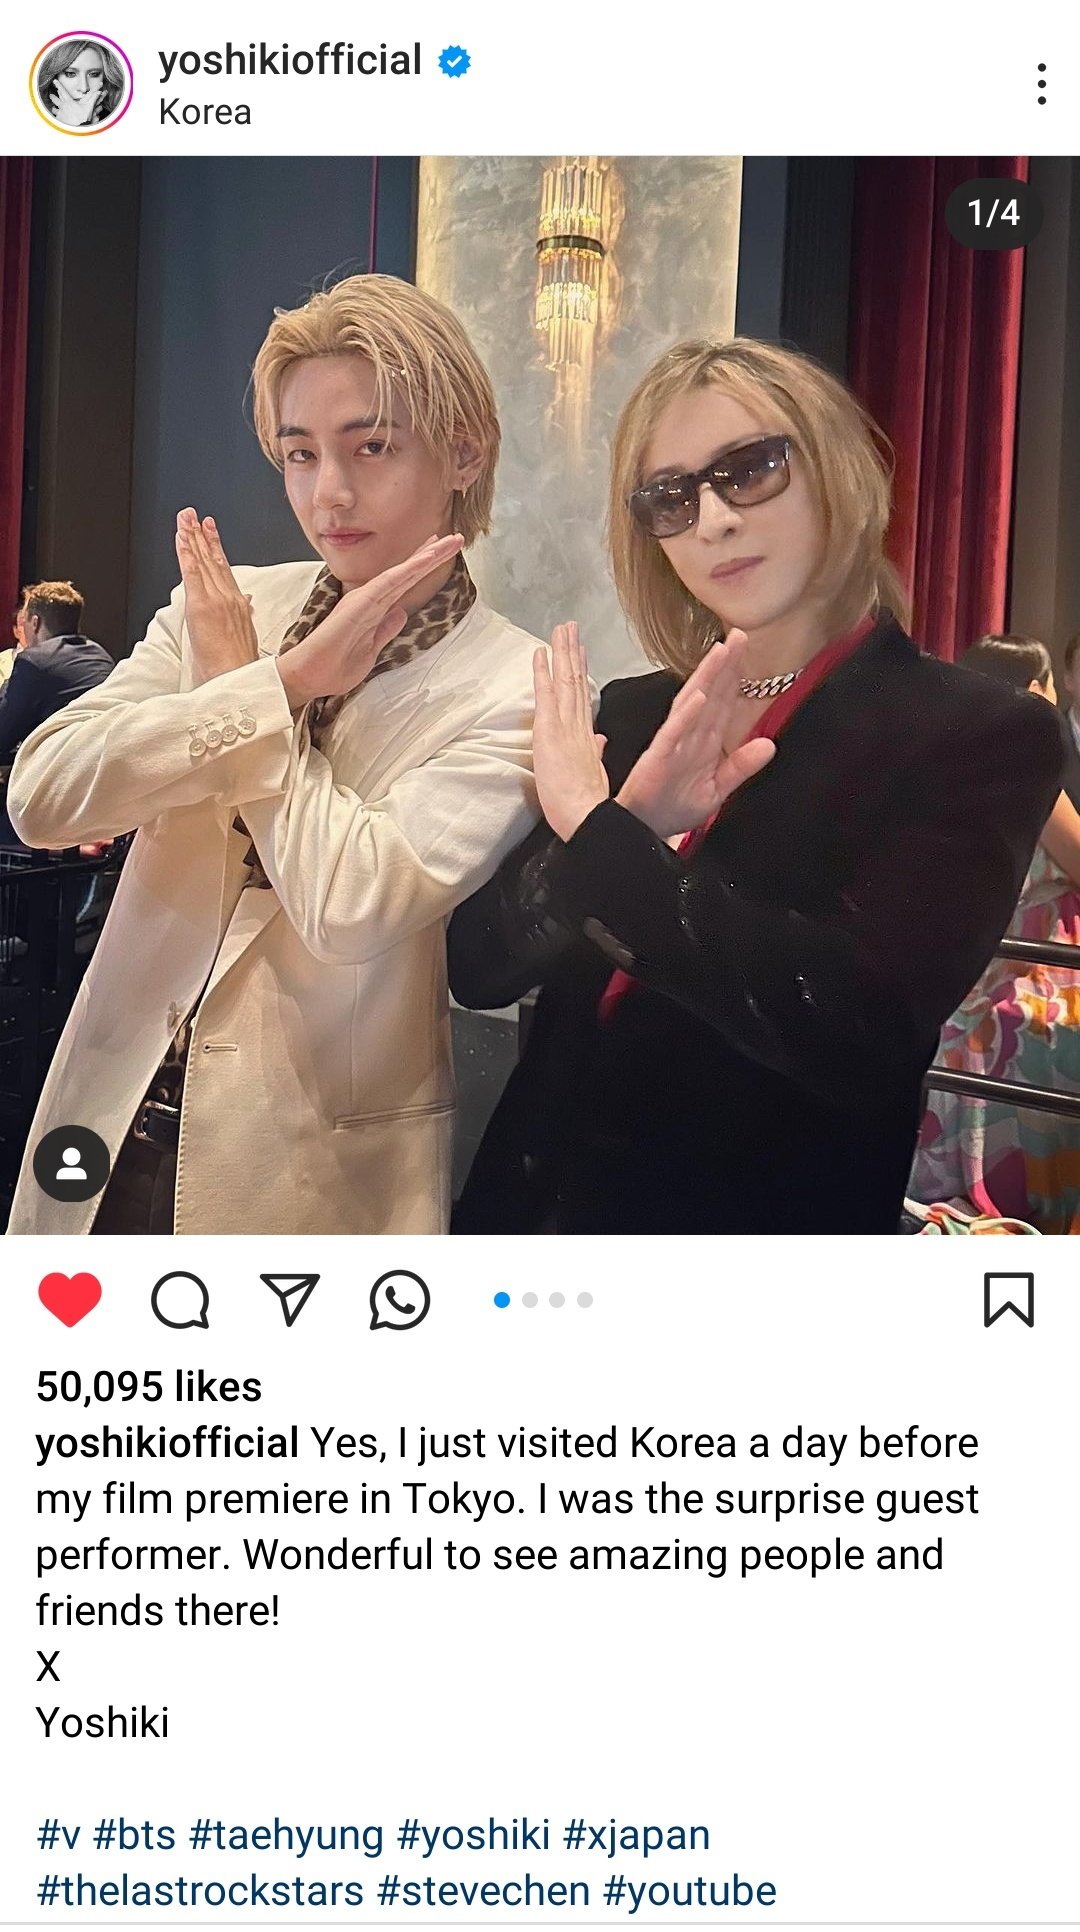 Taehyung India FB  FRI(END)Sˡᵒᶜᵏᵈᵒʷⁿ •◡• on X: 📸[IG] Yoshiki - Japanese  musician, songwriter, composer and record producer - posted picture with  Taehyung. Can we hope for an anime OST? 🥺 Mind